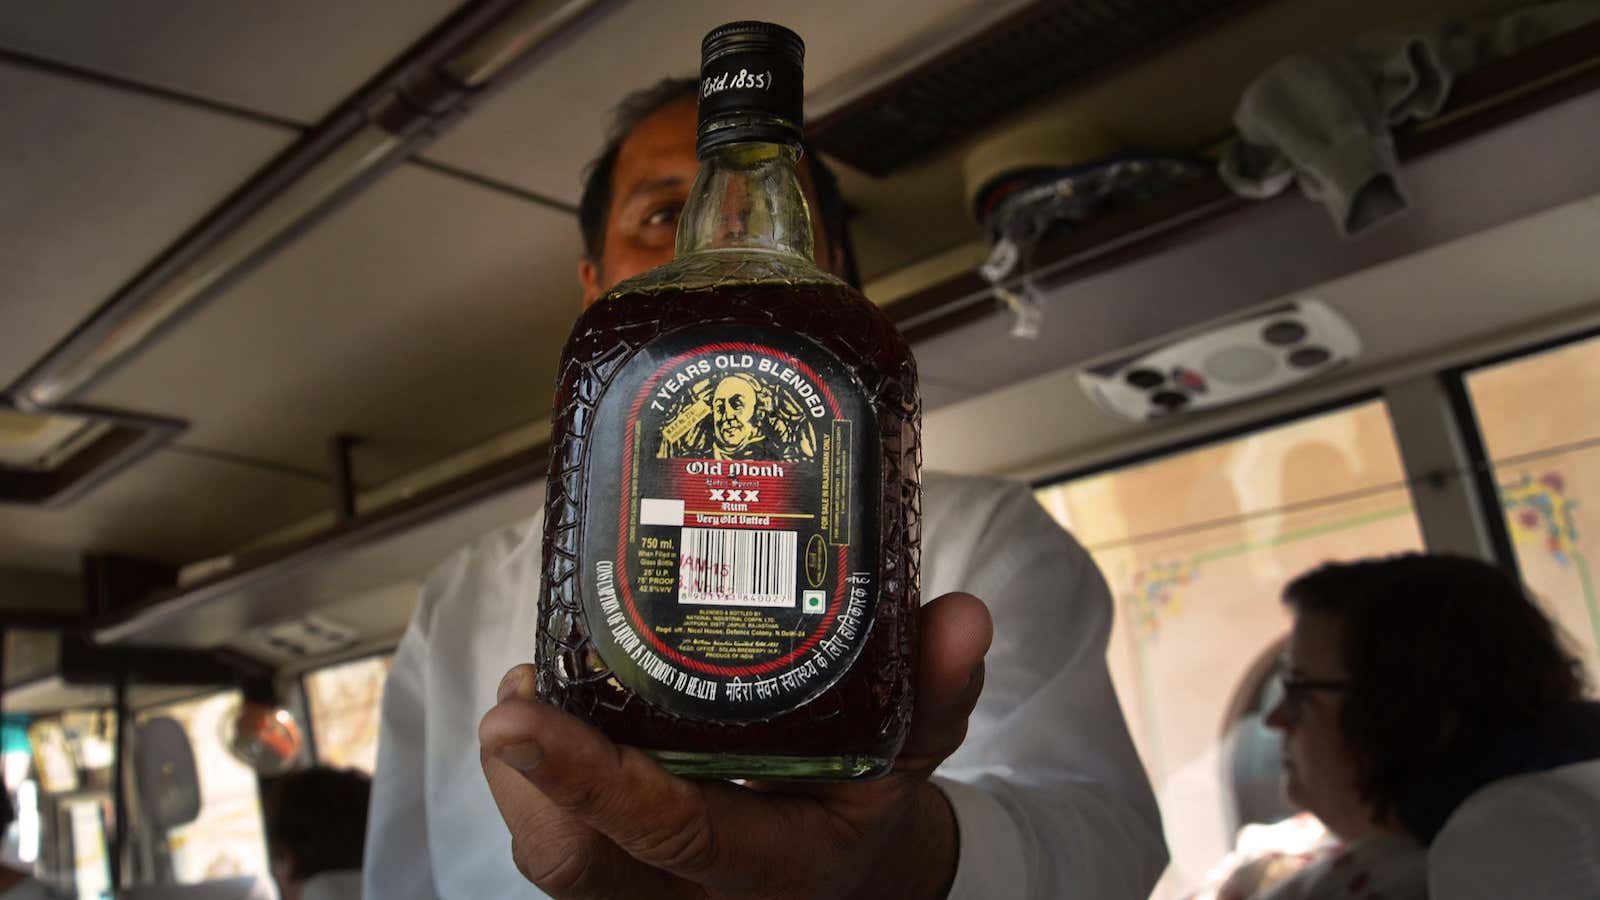 It is not impossible for Old Monk to reclaim lost ground.